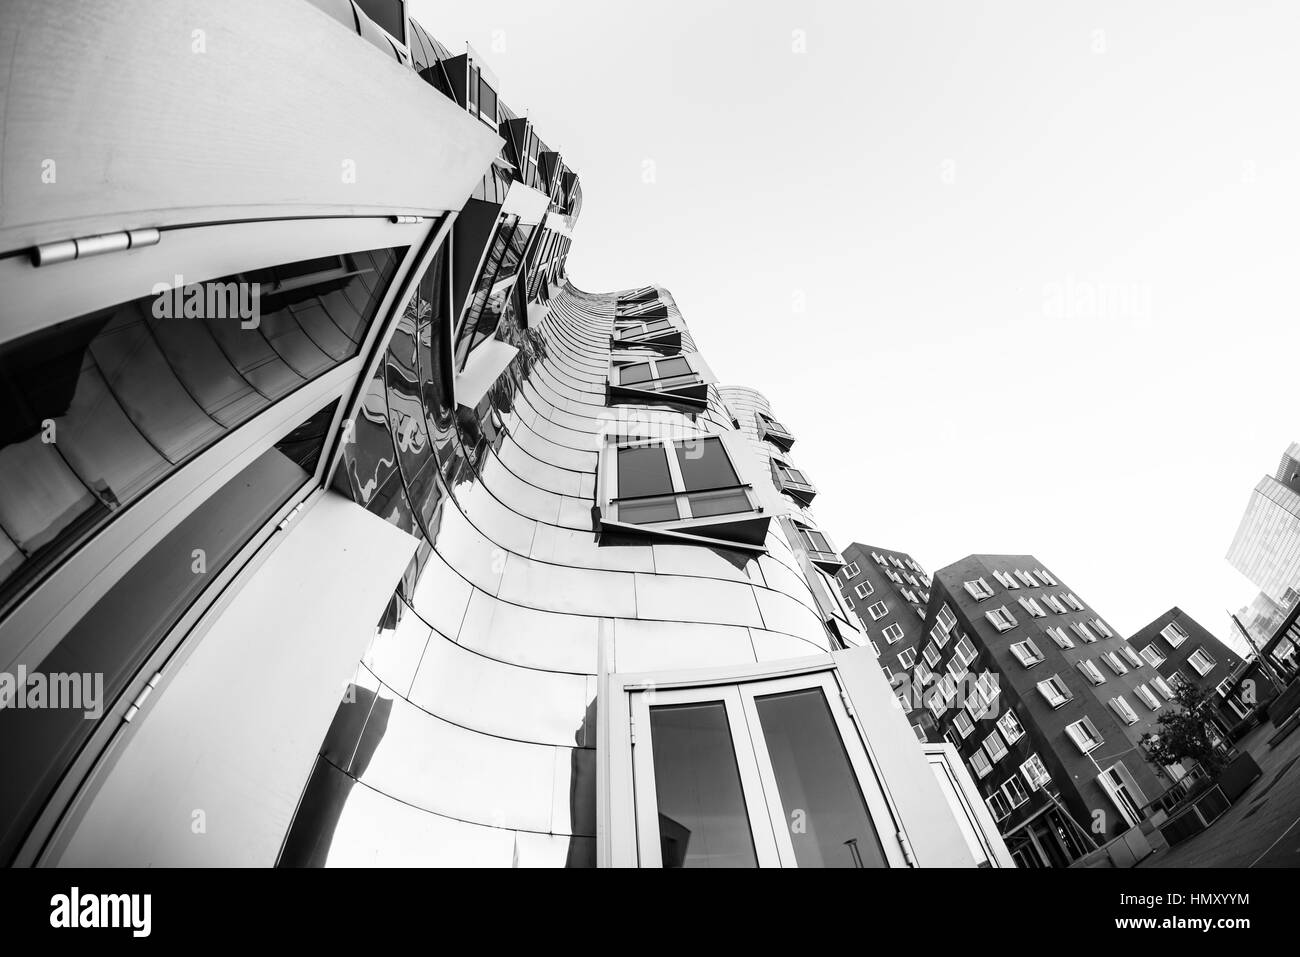 DUESSELDORF, GERMANY - JANUARY 22, 2017: The famous Chrome-Building in the New Media Harbor taken by a Fish Eye Camera in Black & White Stock Photo